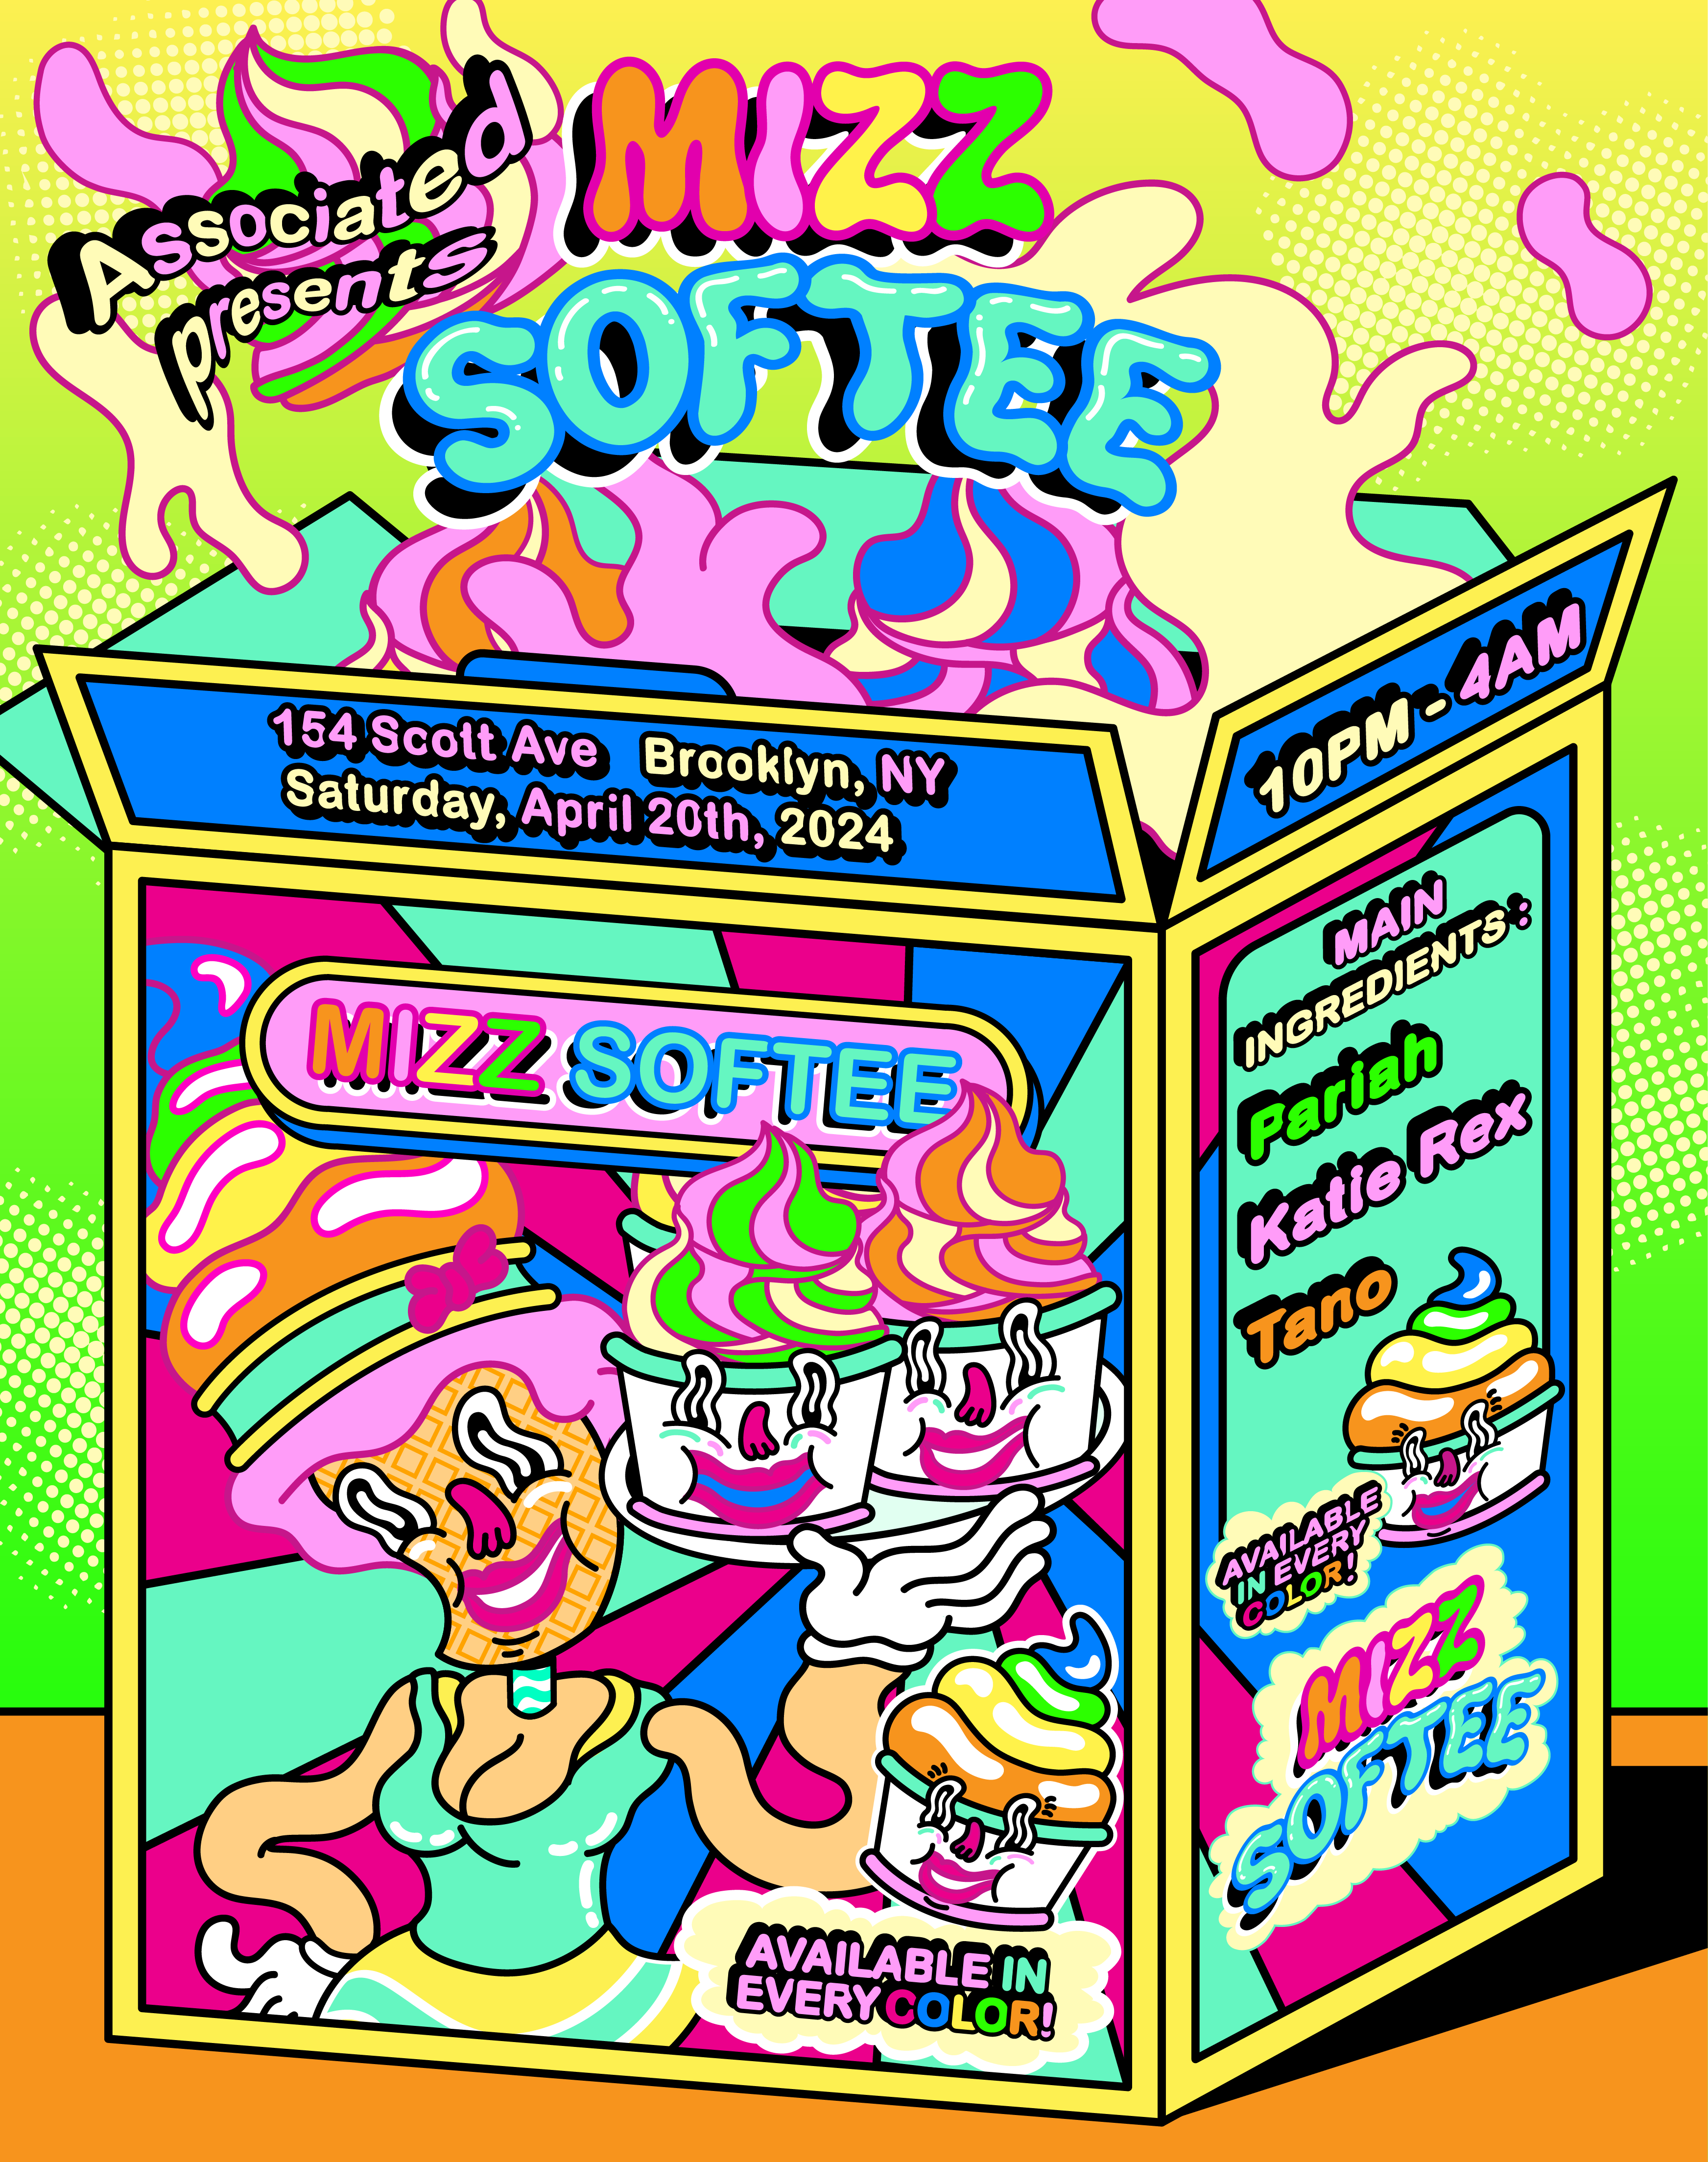 Associated presents Mizz Softee with Pariah, Katie Rex, and Tano - フライヤー表